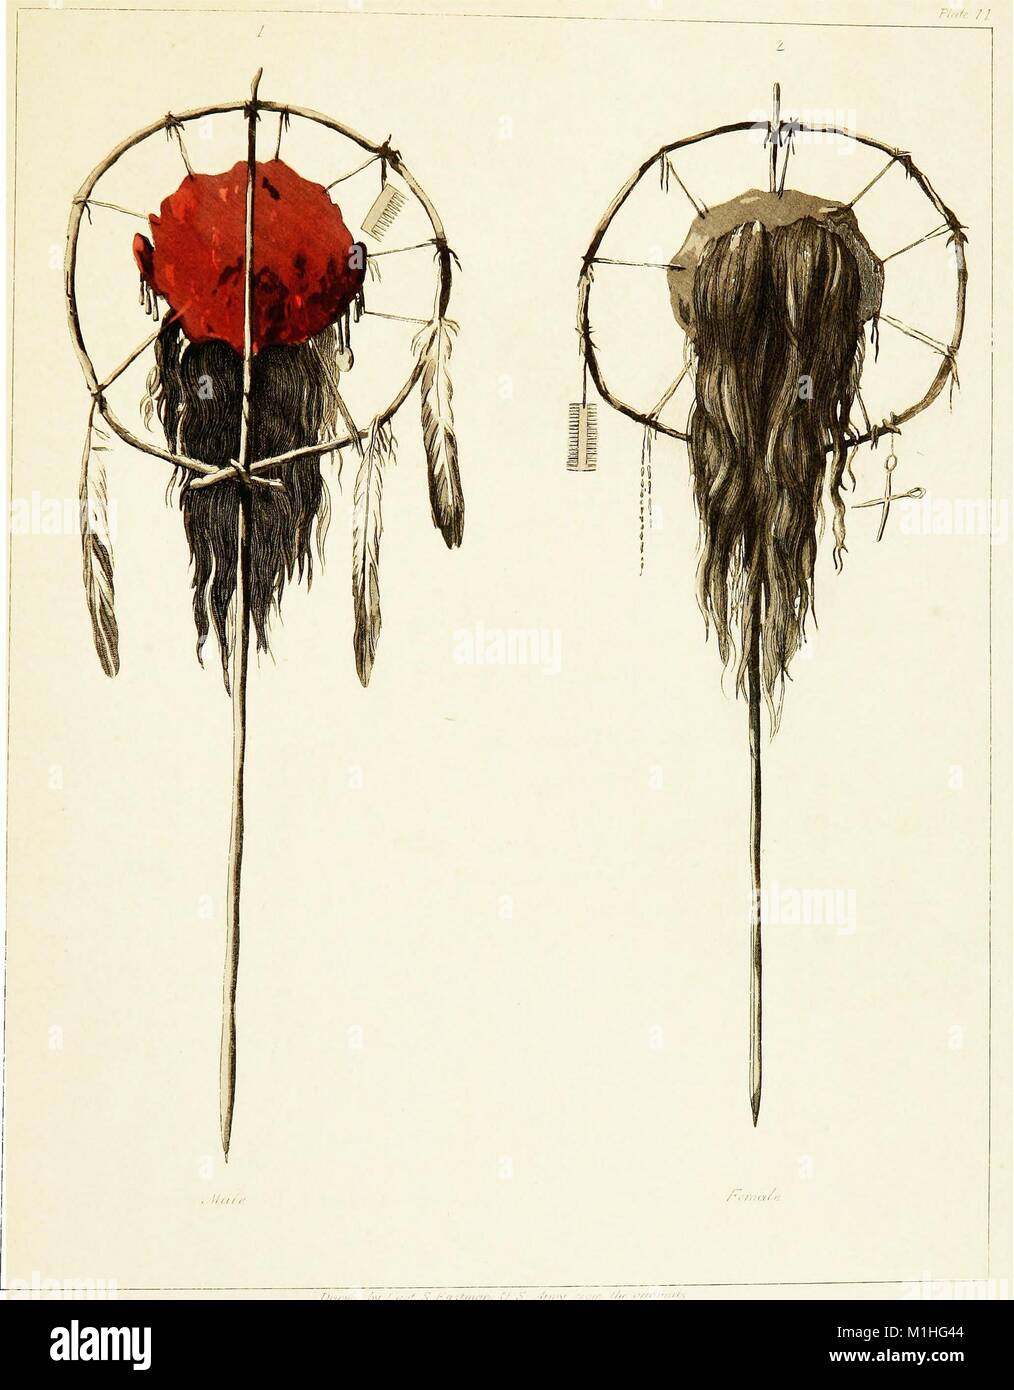 Color illustration of two scalps mounted on staked poles, one with red, skin-side facing forward, three feathers and a comb, the other with hair-side facing forward, a comb and scissors, from the volume ' Historical and statistical information respecting the history, condition, and prospects of the Indian tribes of the United States, collected and prepared under the direction of the Bureau of Indian Affairs per act of Congress of March 3rd, 1847' authored by Seth Eastman and Henry Rowe Schoolcraft, 1851. () Stock Photo